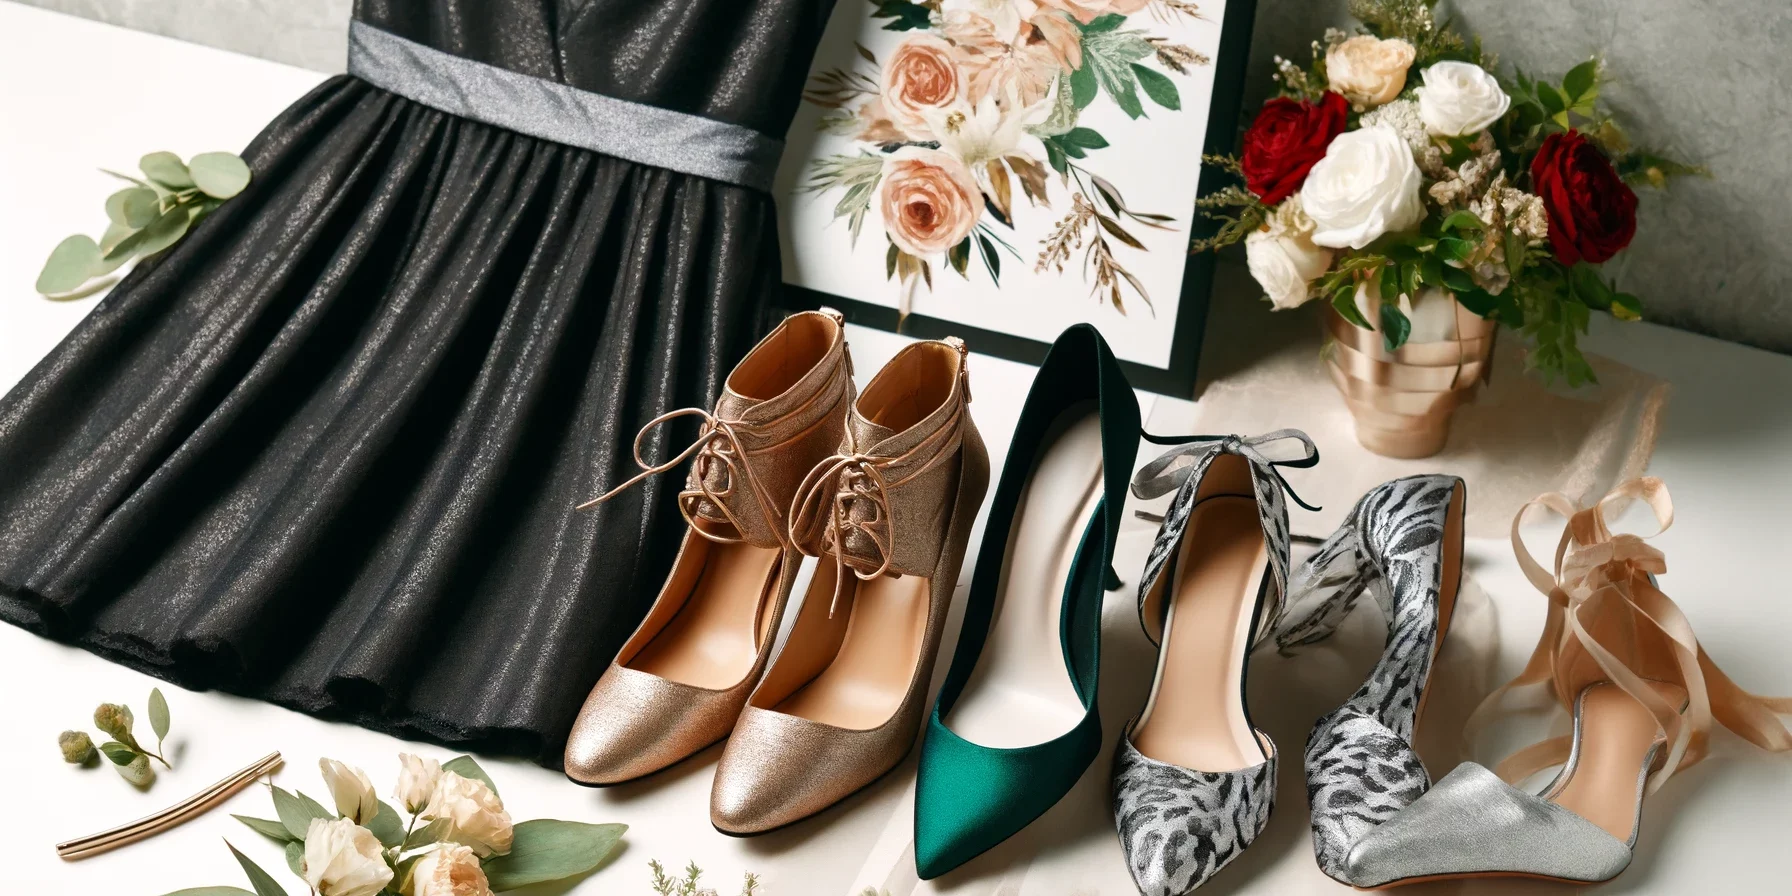 Best Colors Of Shoes To Pair With Black Dress For Wedding